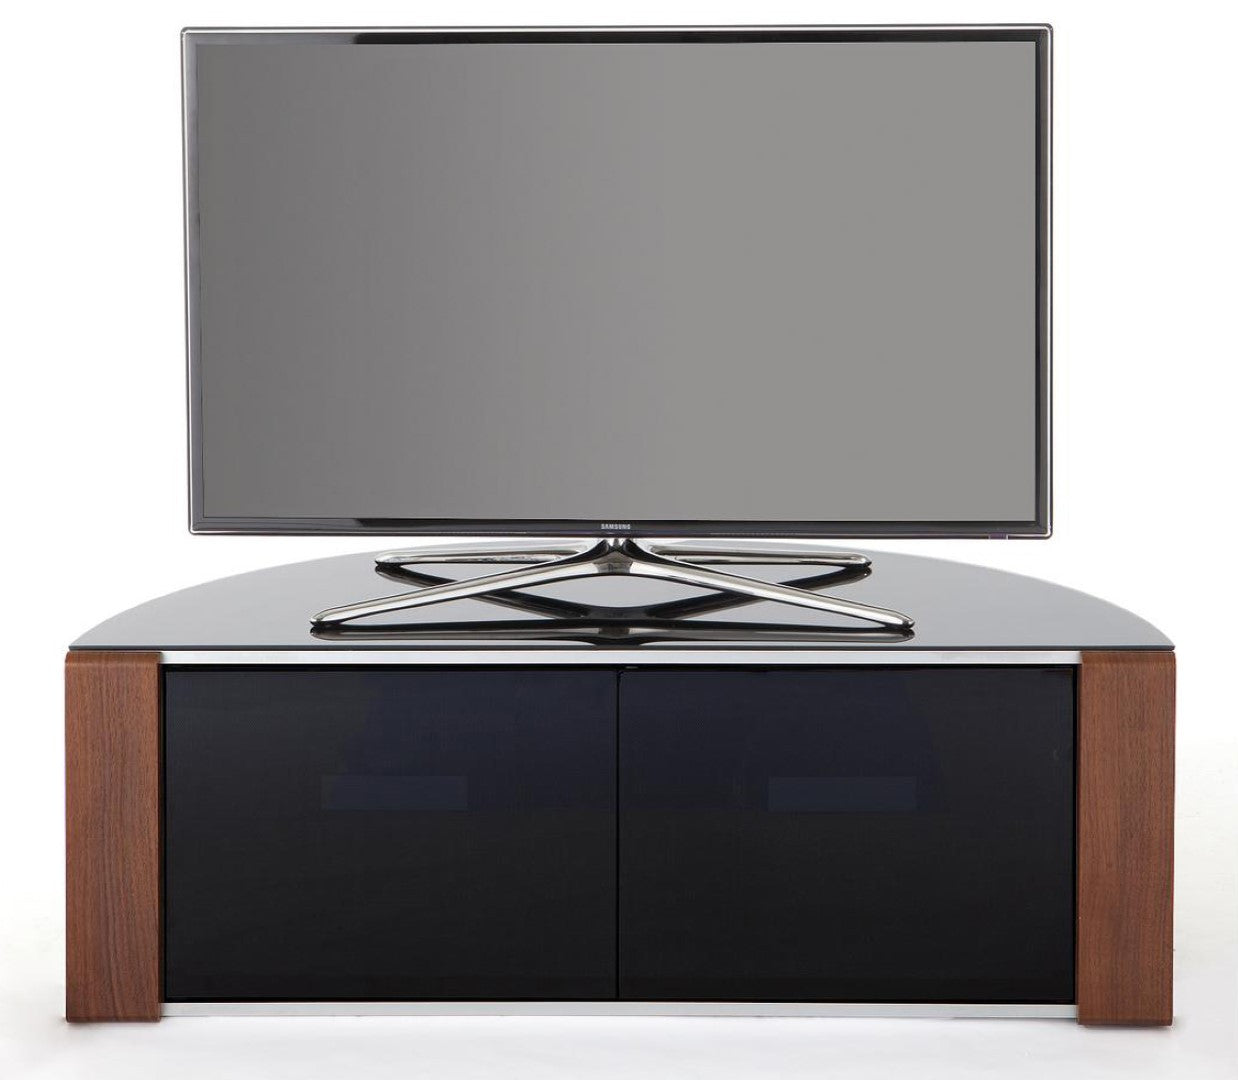 MDA Designs Sirius 1200 Corner TV Unit For TVs Up To 55 Inches